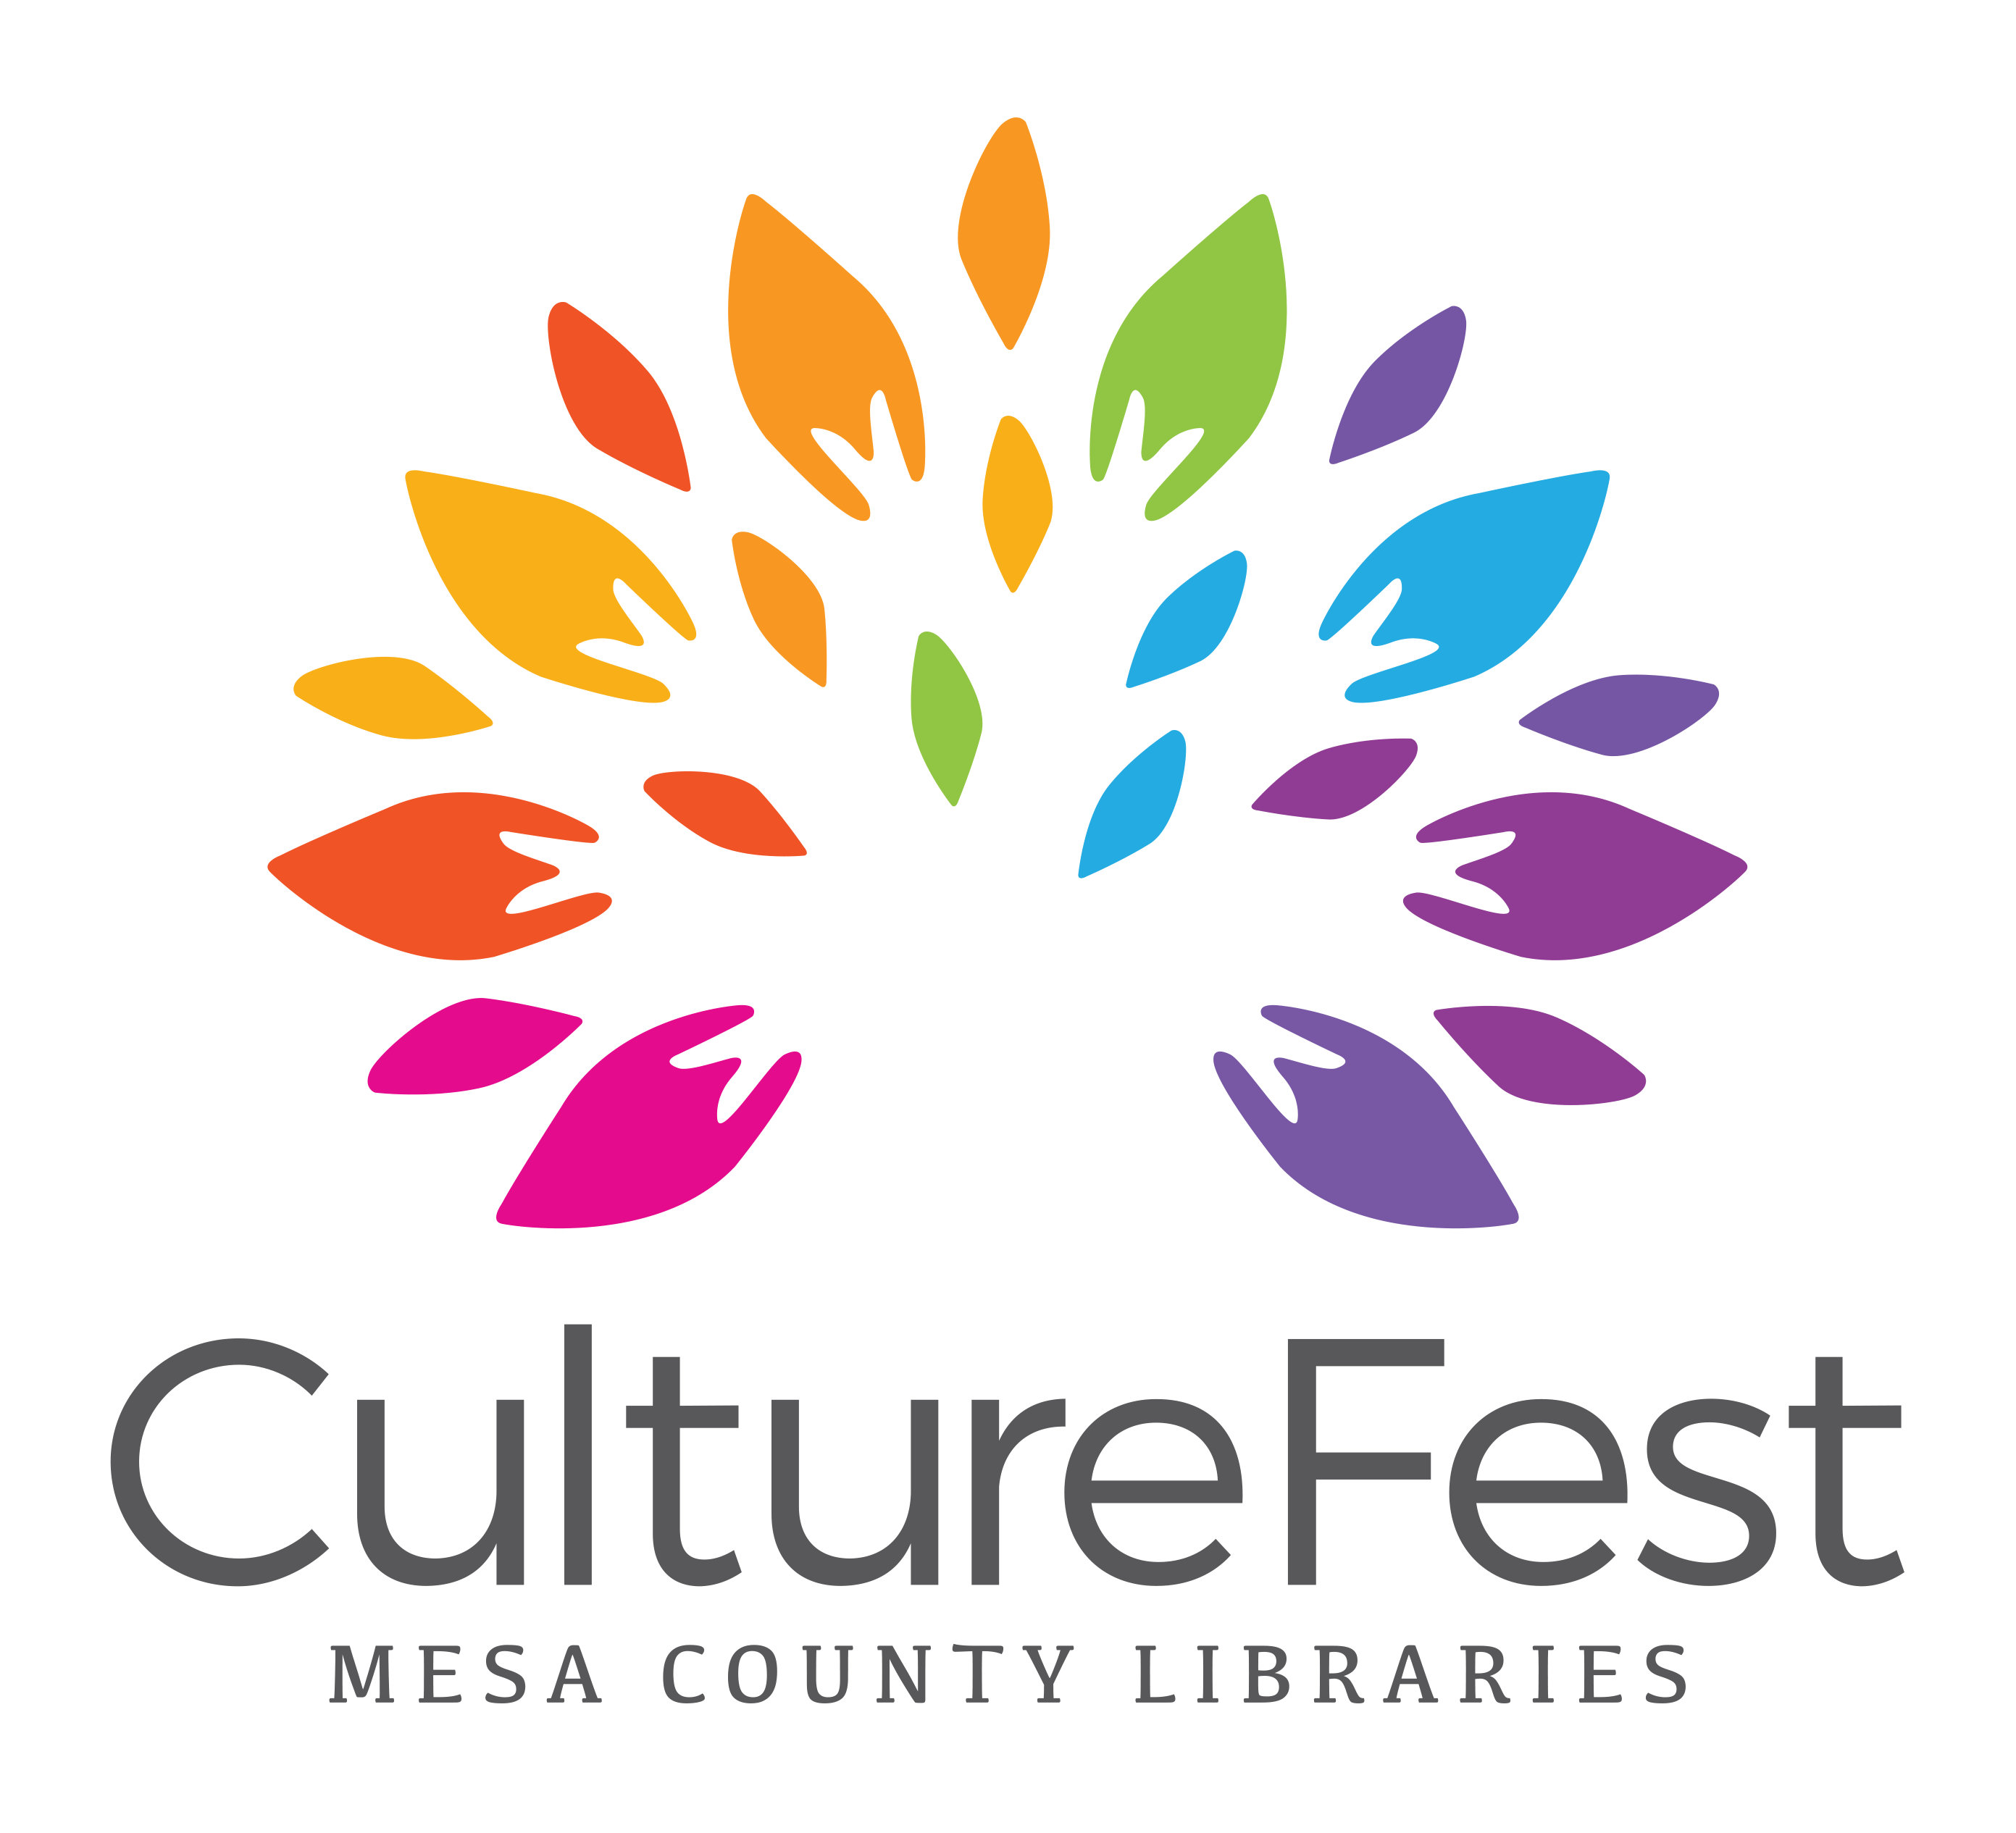 Fest Logo - Library seeks talented performers for 2019 Culture Fest